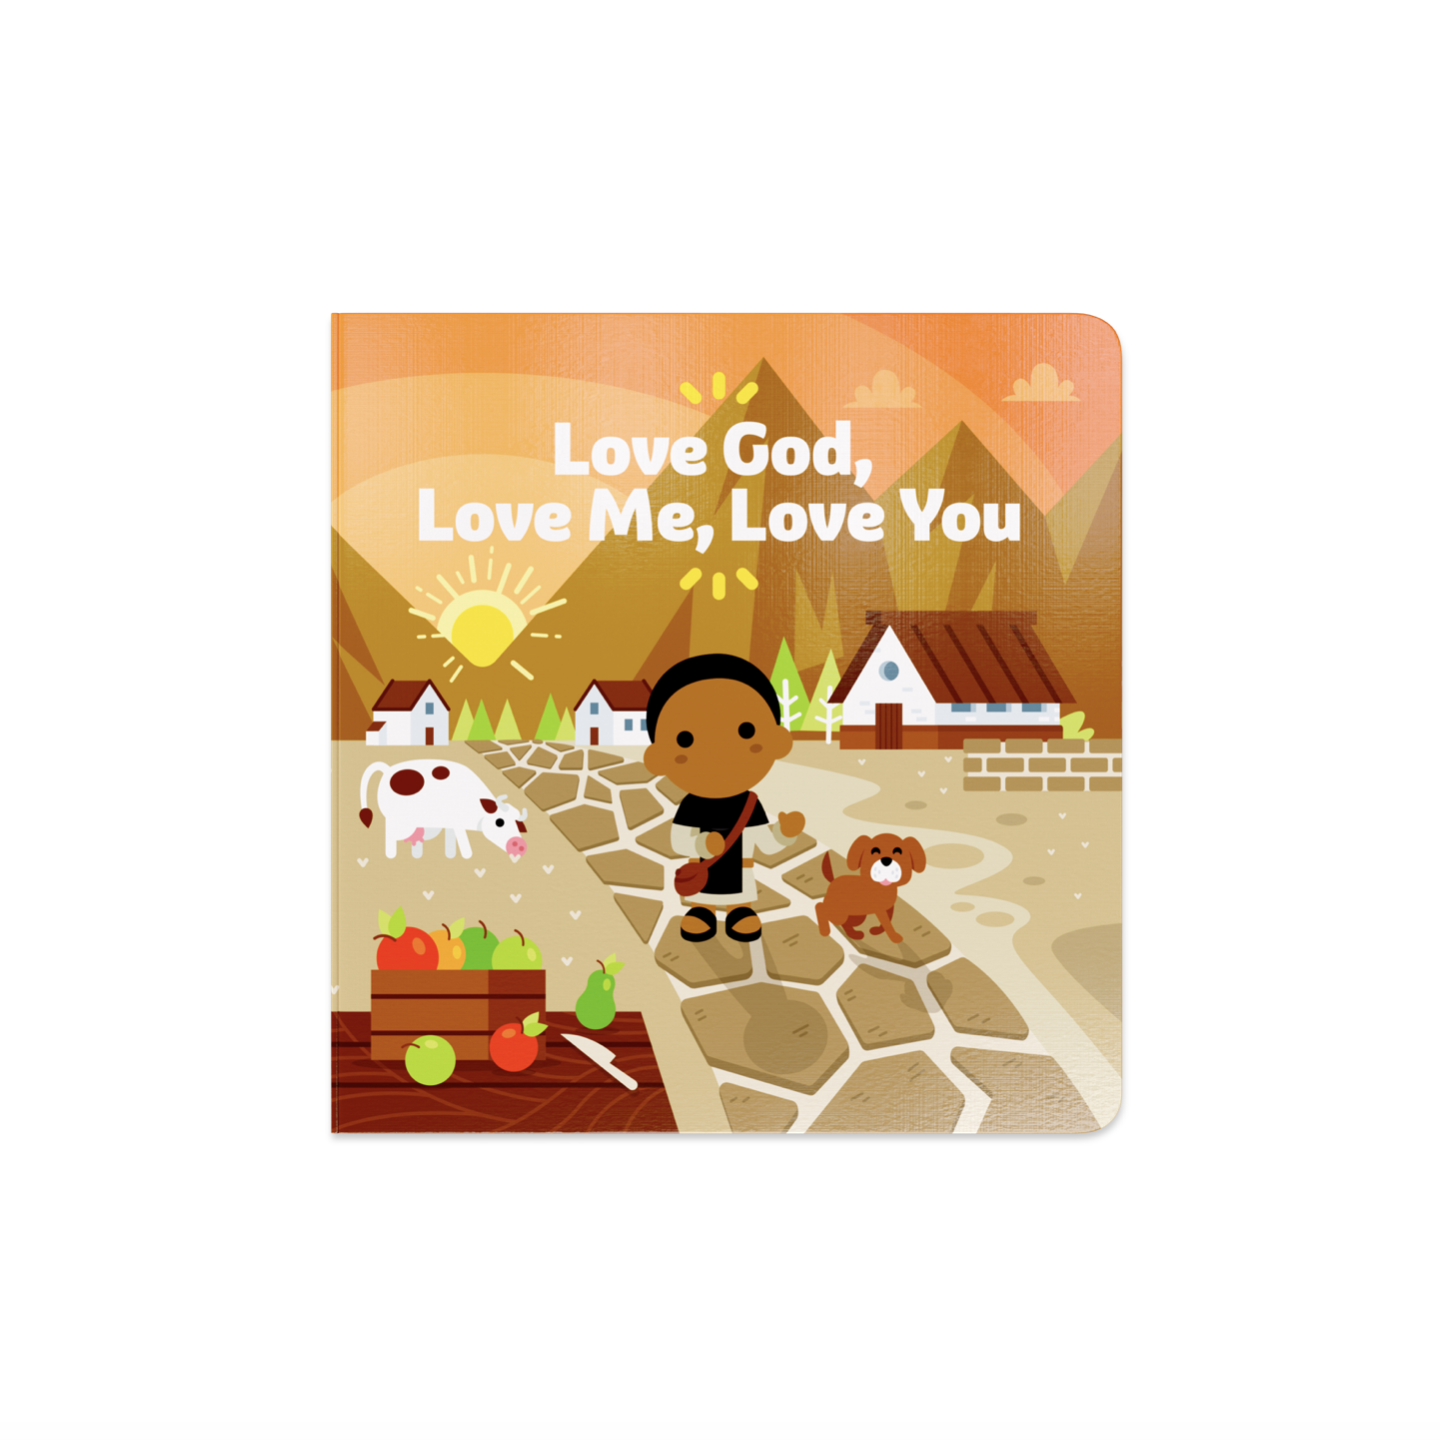 "Love God, Love Me, Love You" Board Book by Tiny Saints